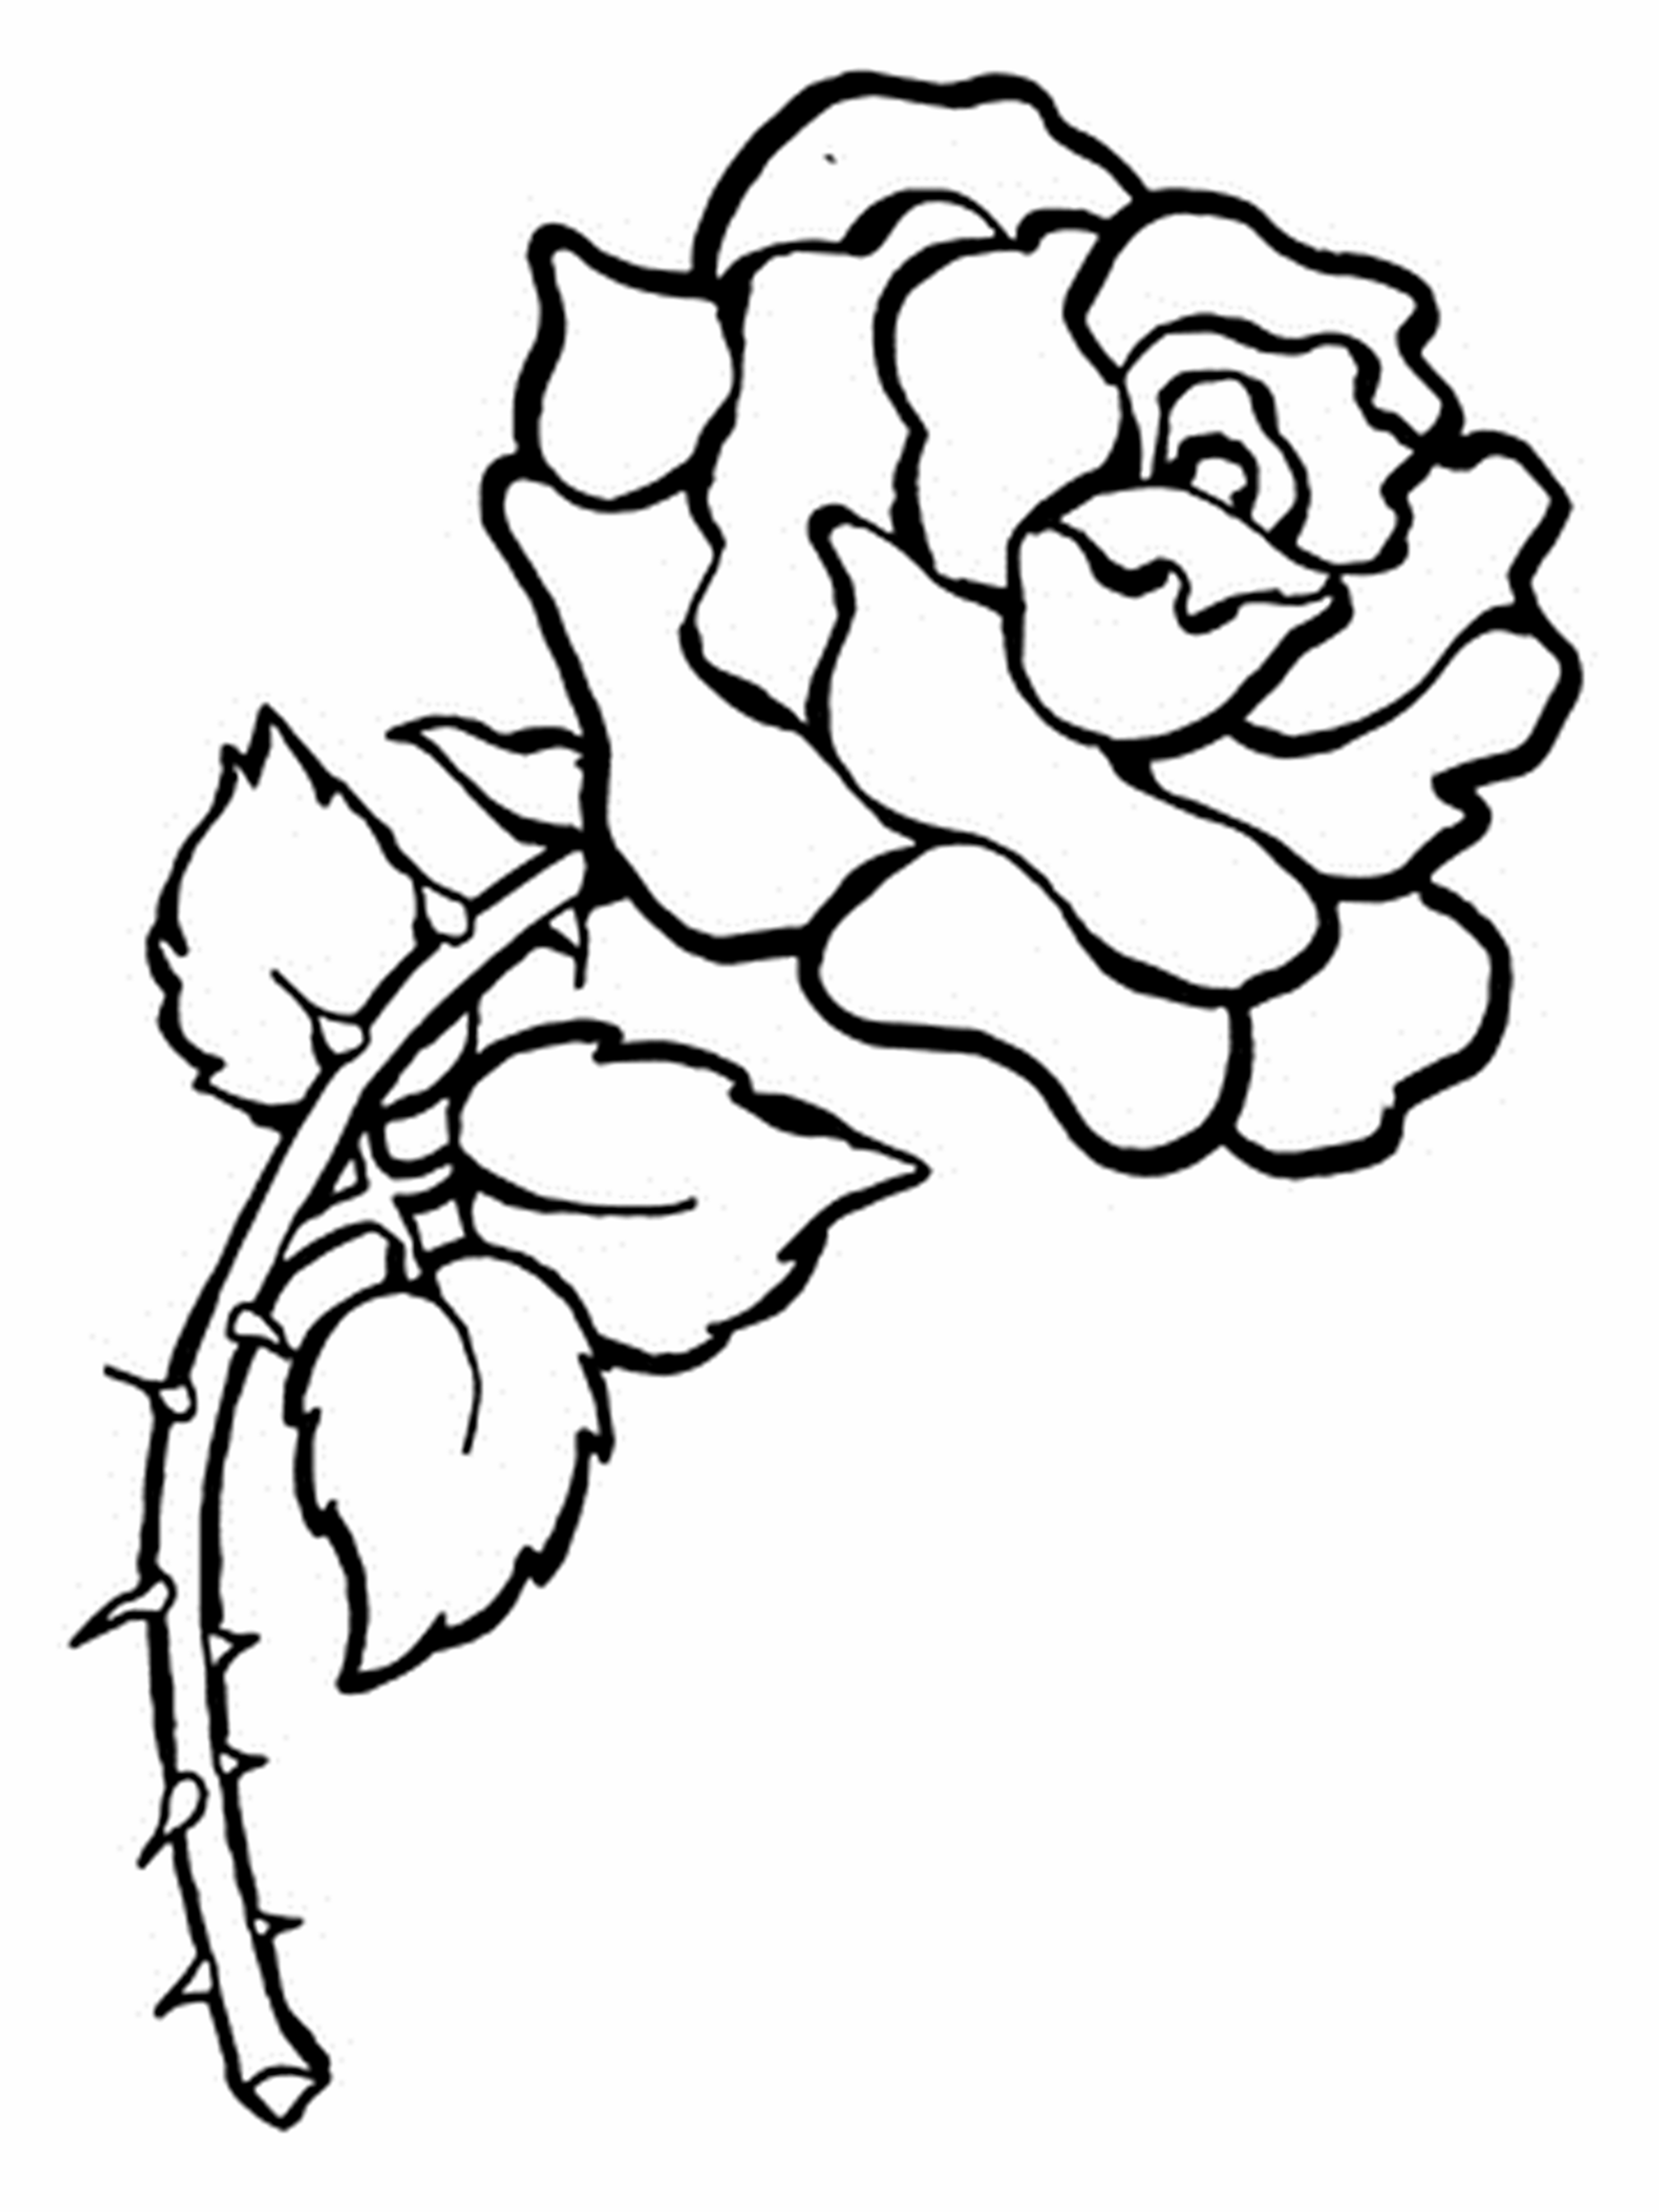 Flowers Coloring Pages Free Printable Free Printable Flower Coloring Pages For Kids Best Coloring Pages